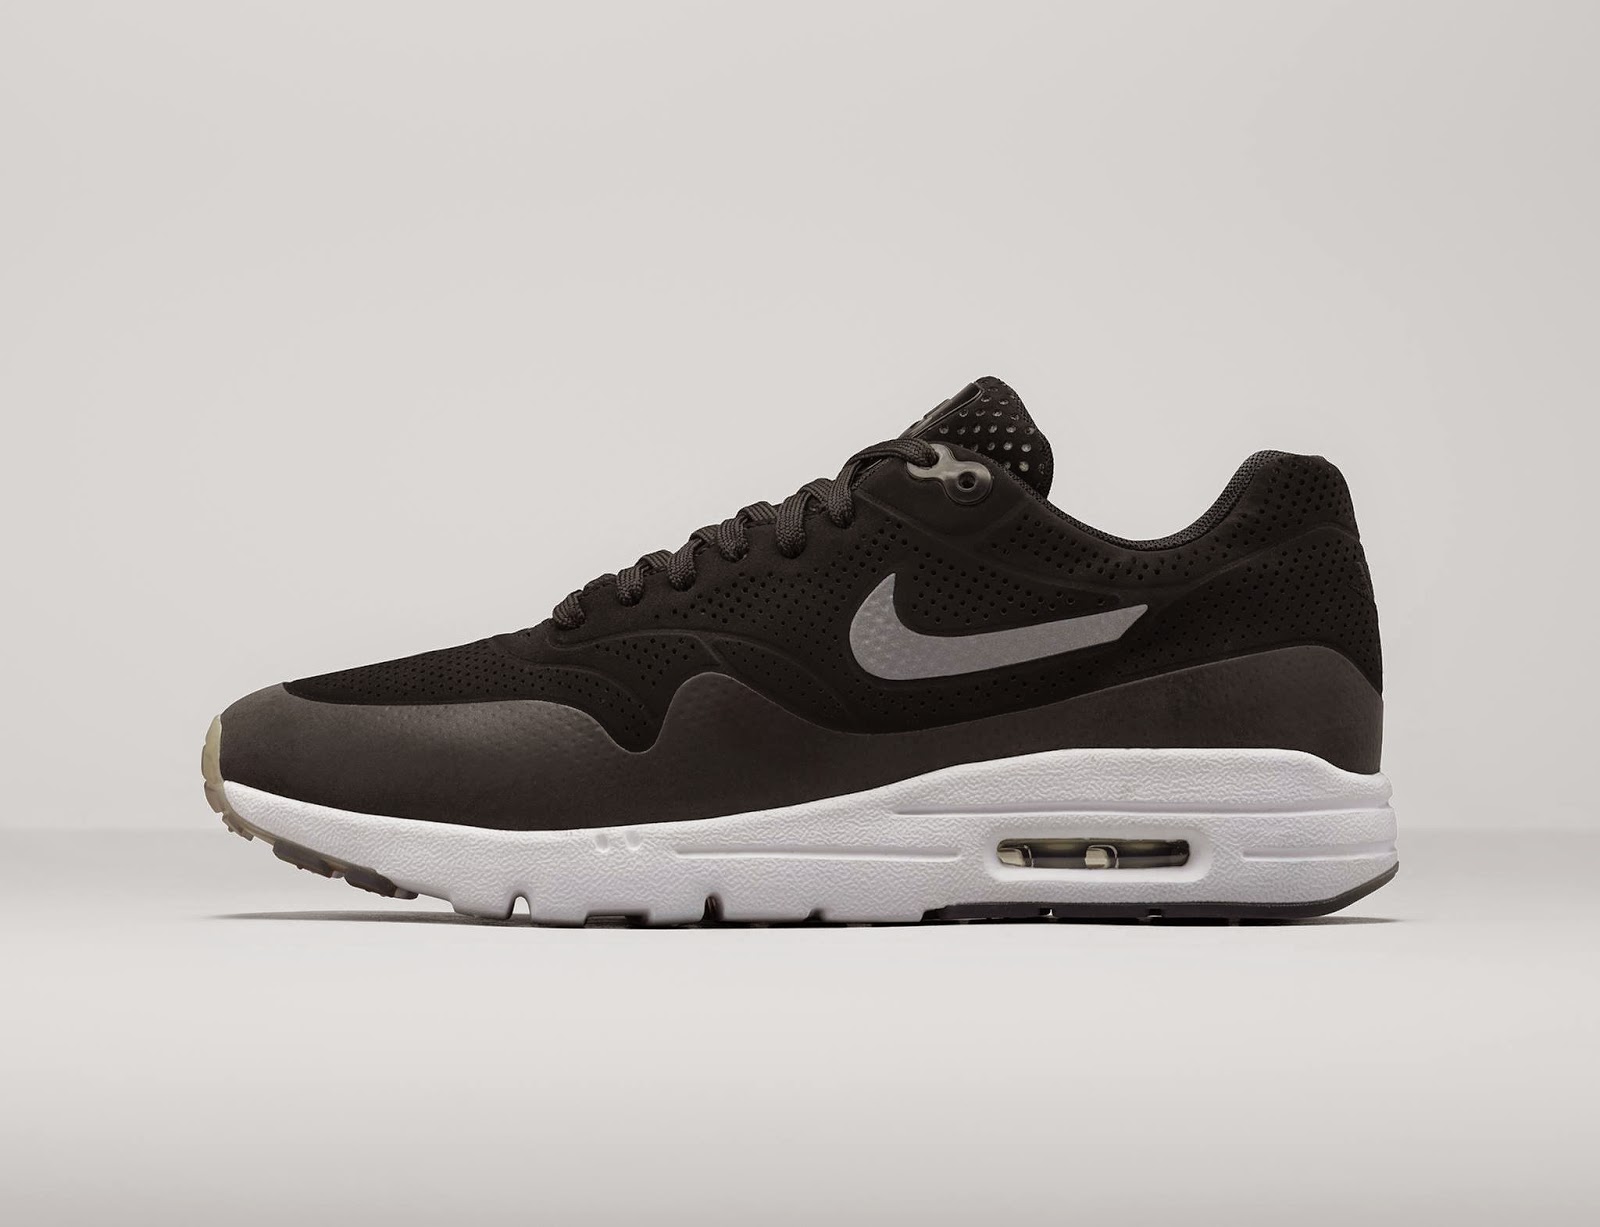 Swag Craze: Introducing the Nike Air Max 1 Ultra Moire - Ultra Light and Ultra Comfortable